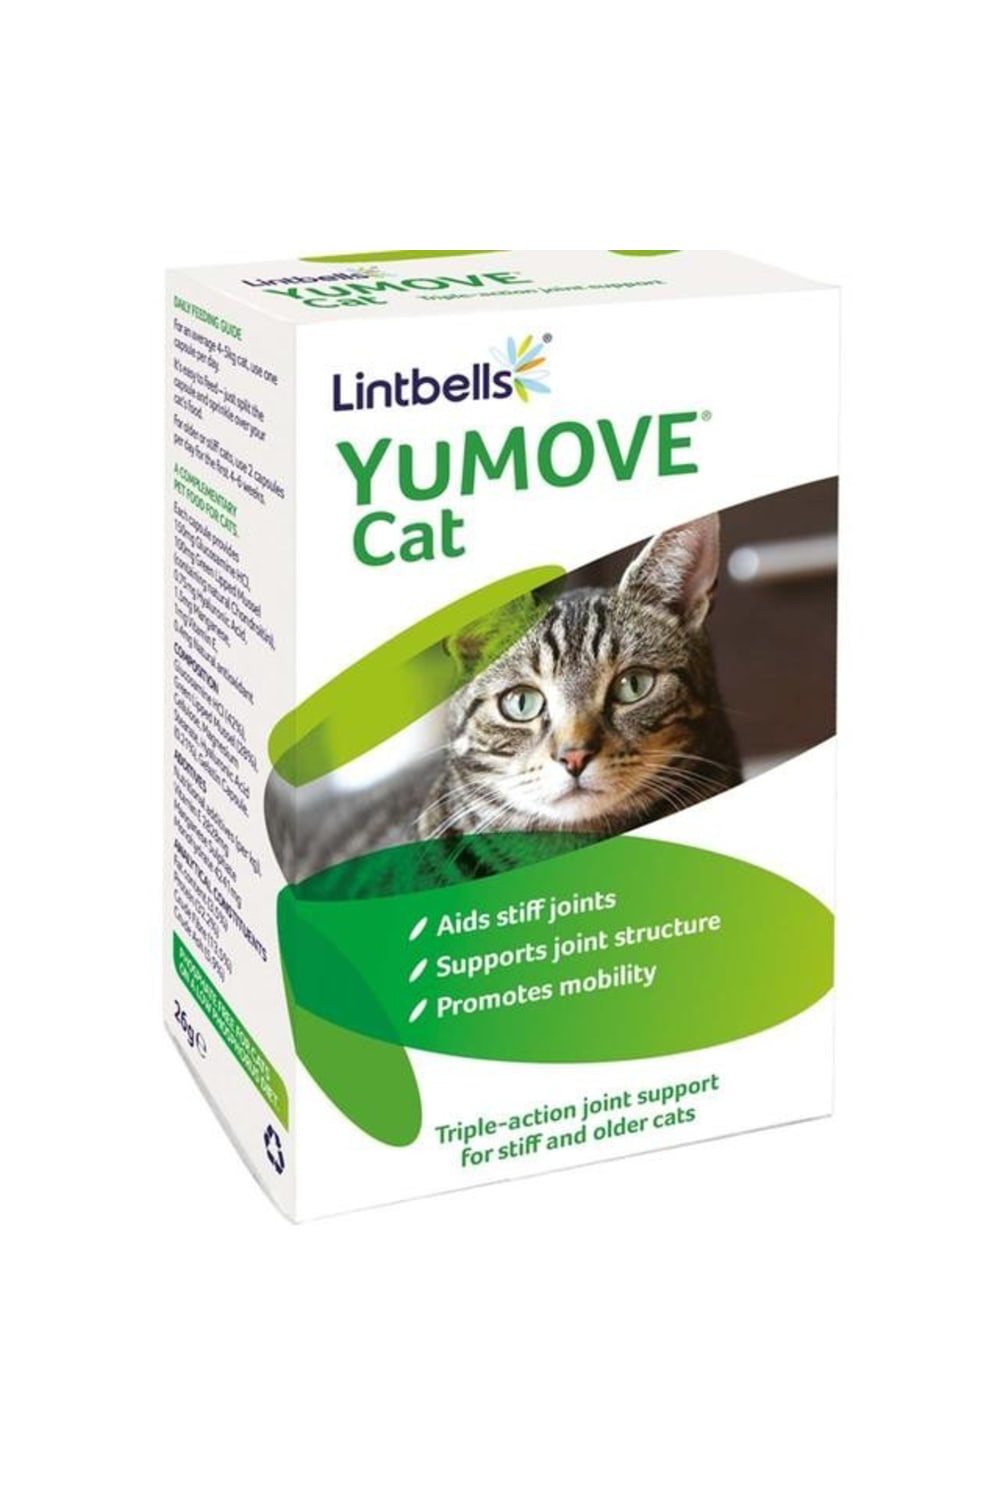 Lintbells YuMOVE Cat Supplements (May Vary) (60 Capsules)